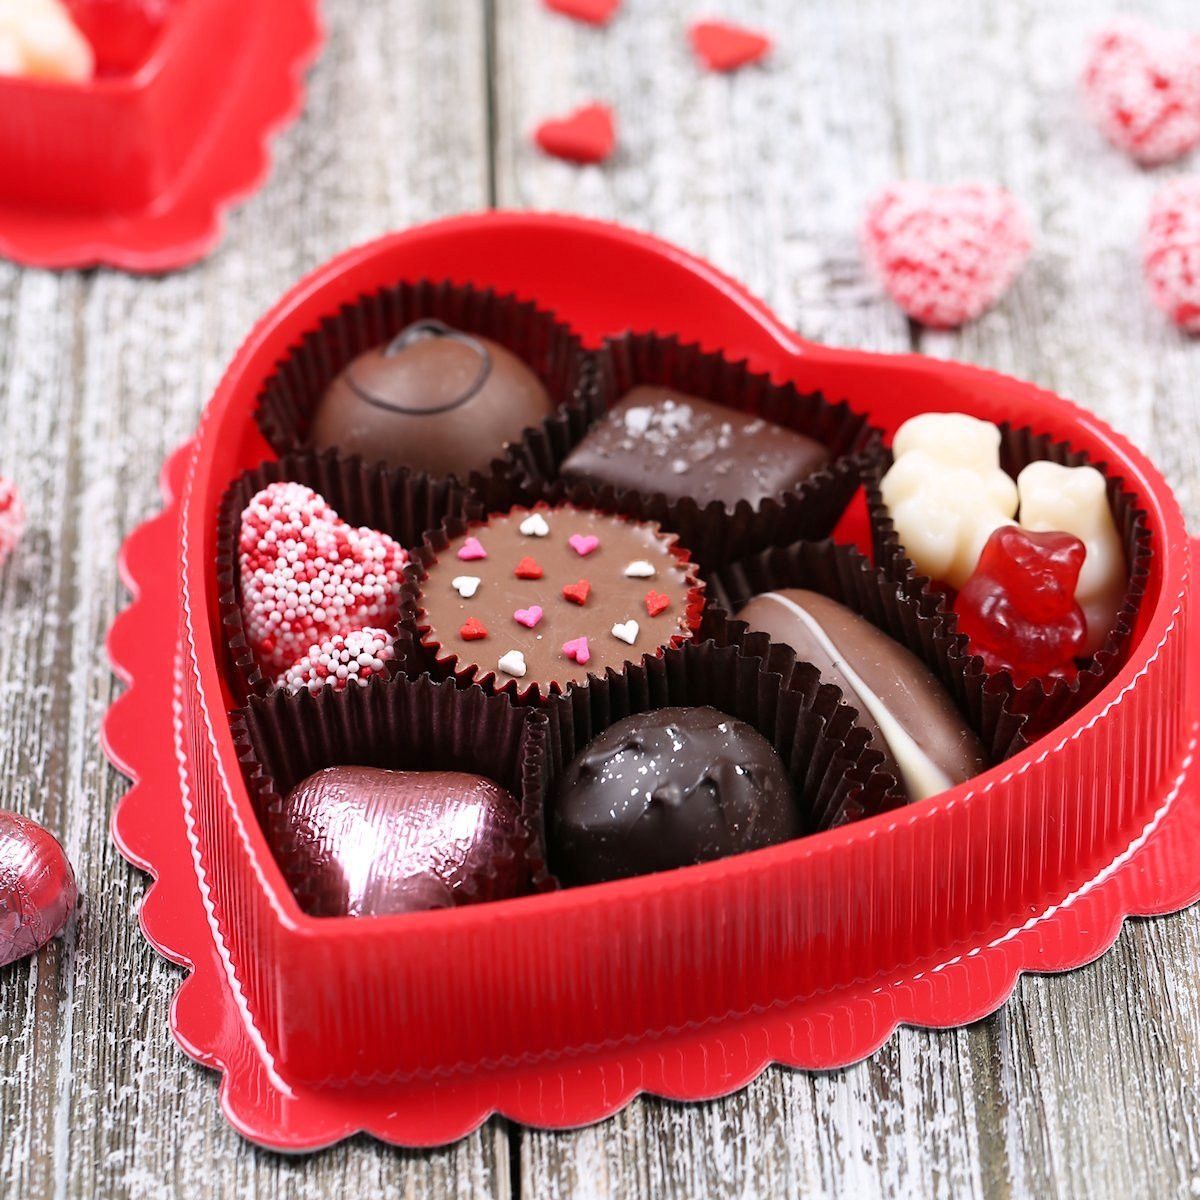 Valentines Day Candy Boxes
 Medium Heart Candy Box Valentine s Day Candy Boxes Red